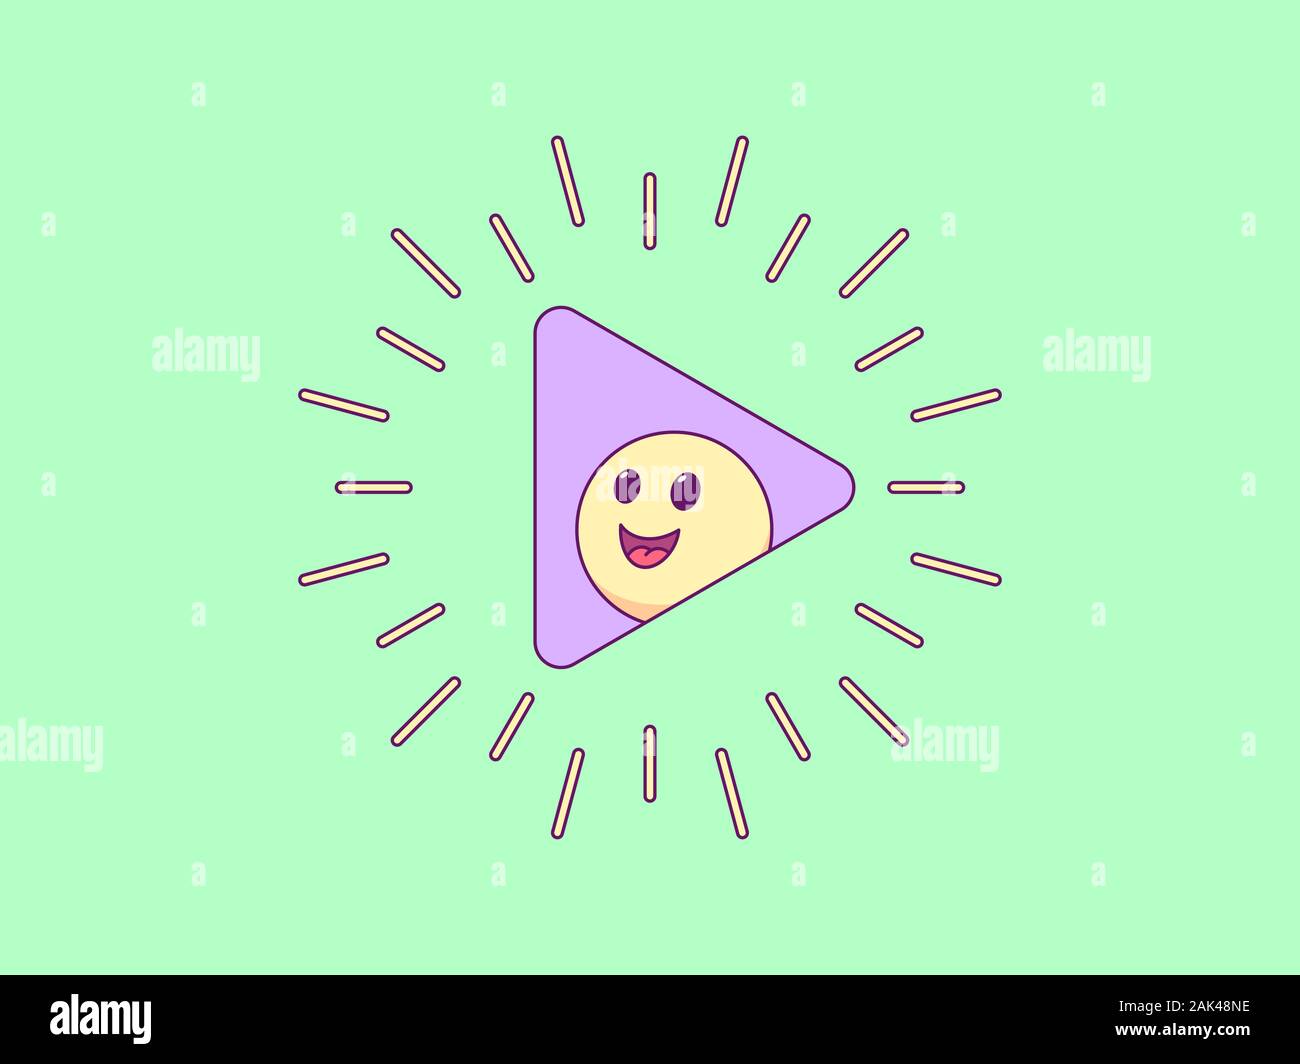 Cartoon composition with play sign surrounded rays and cheerful emoji. Minimalistic vector illustration, gaming social media content Stock Vector